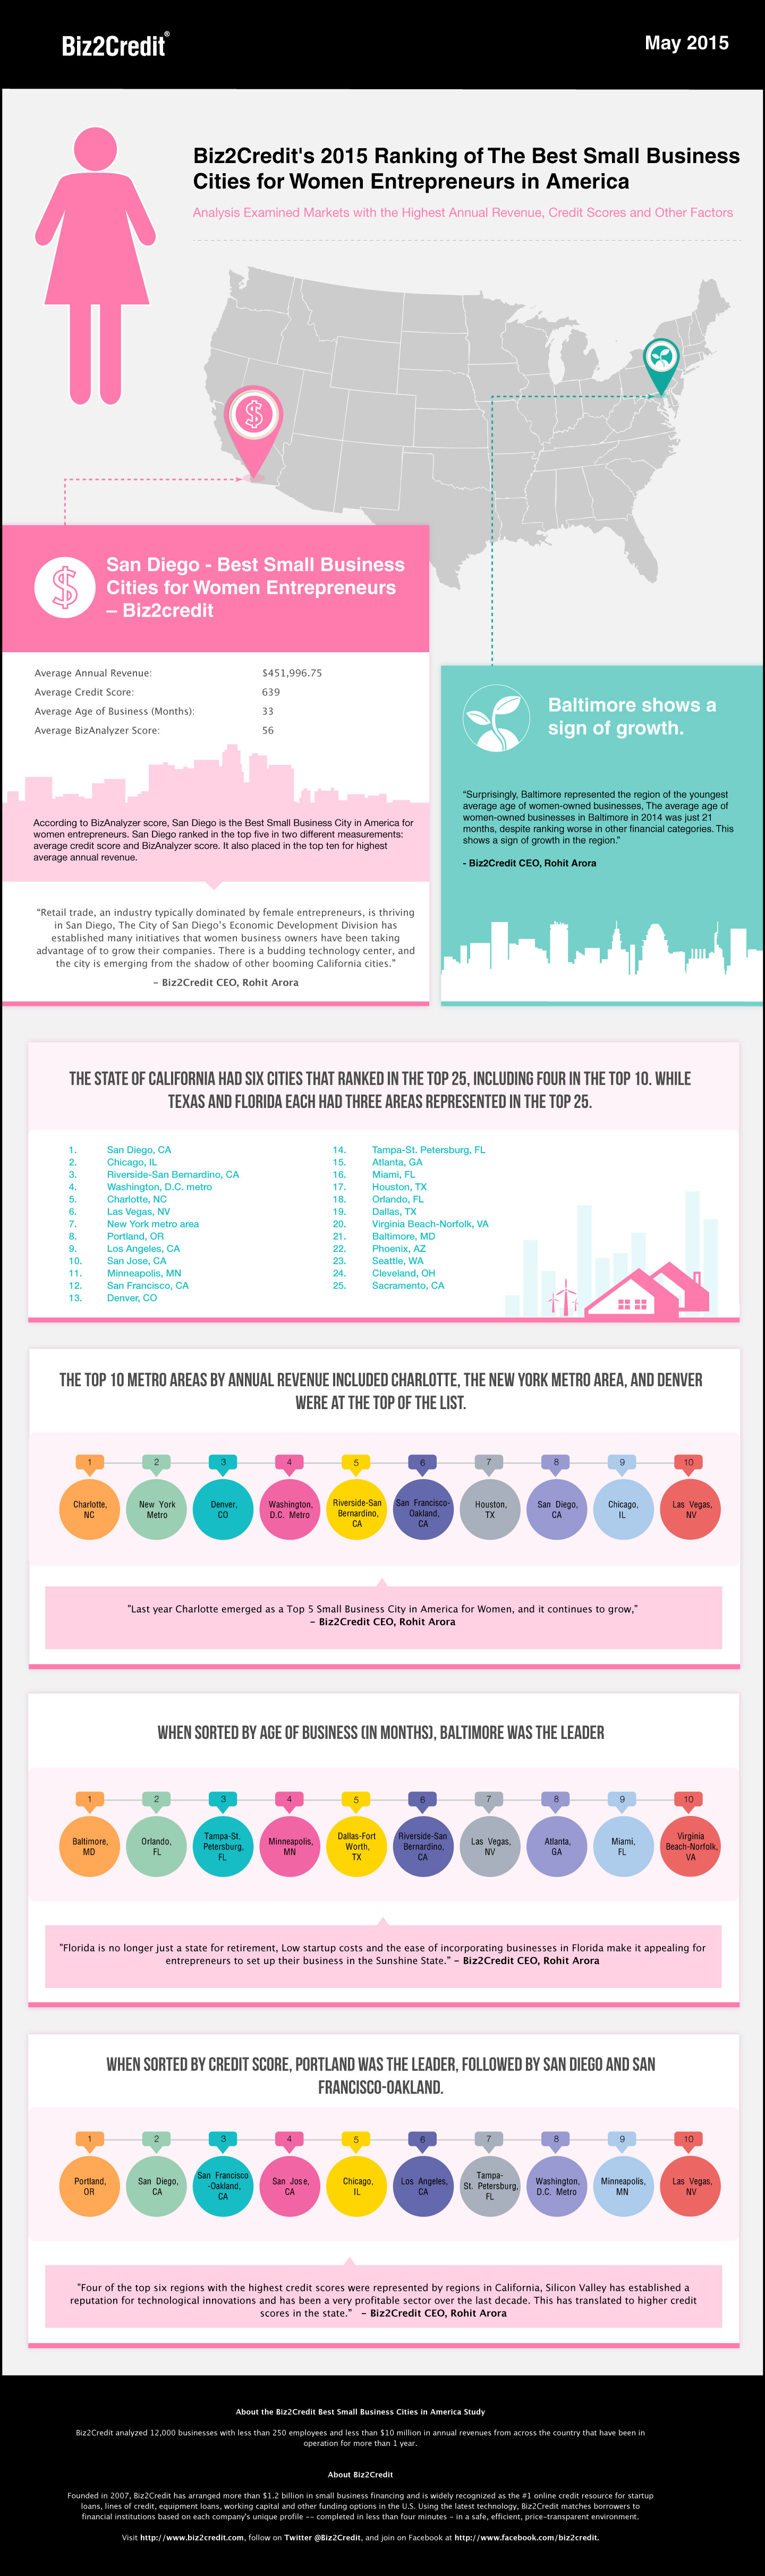 Info graphic: San Diego - Small Business Cities for Women Entrepreneurs